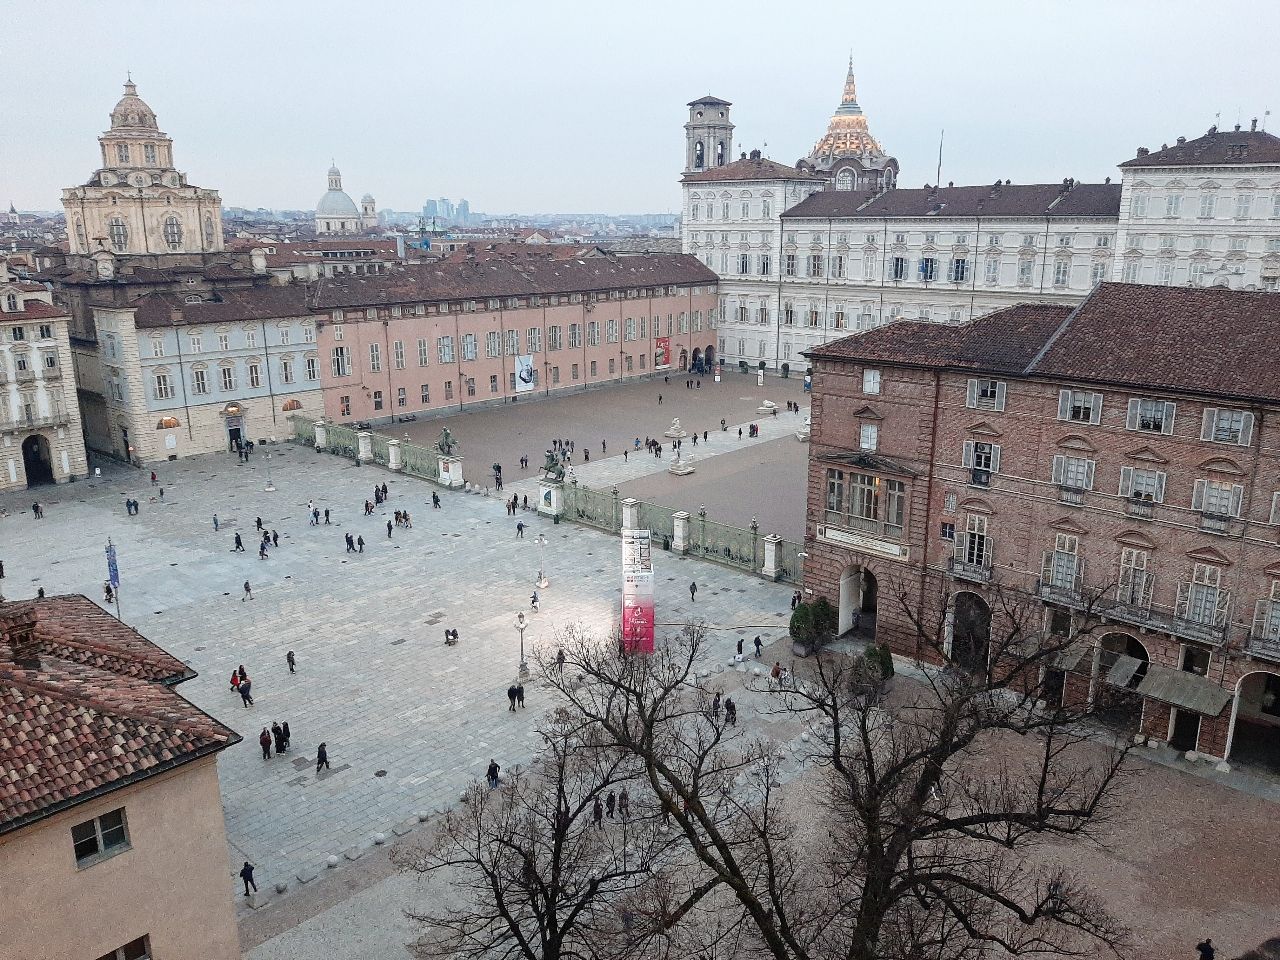 Piazzetta Reale - From Palazzo Madama, Italy